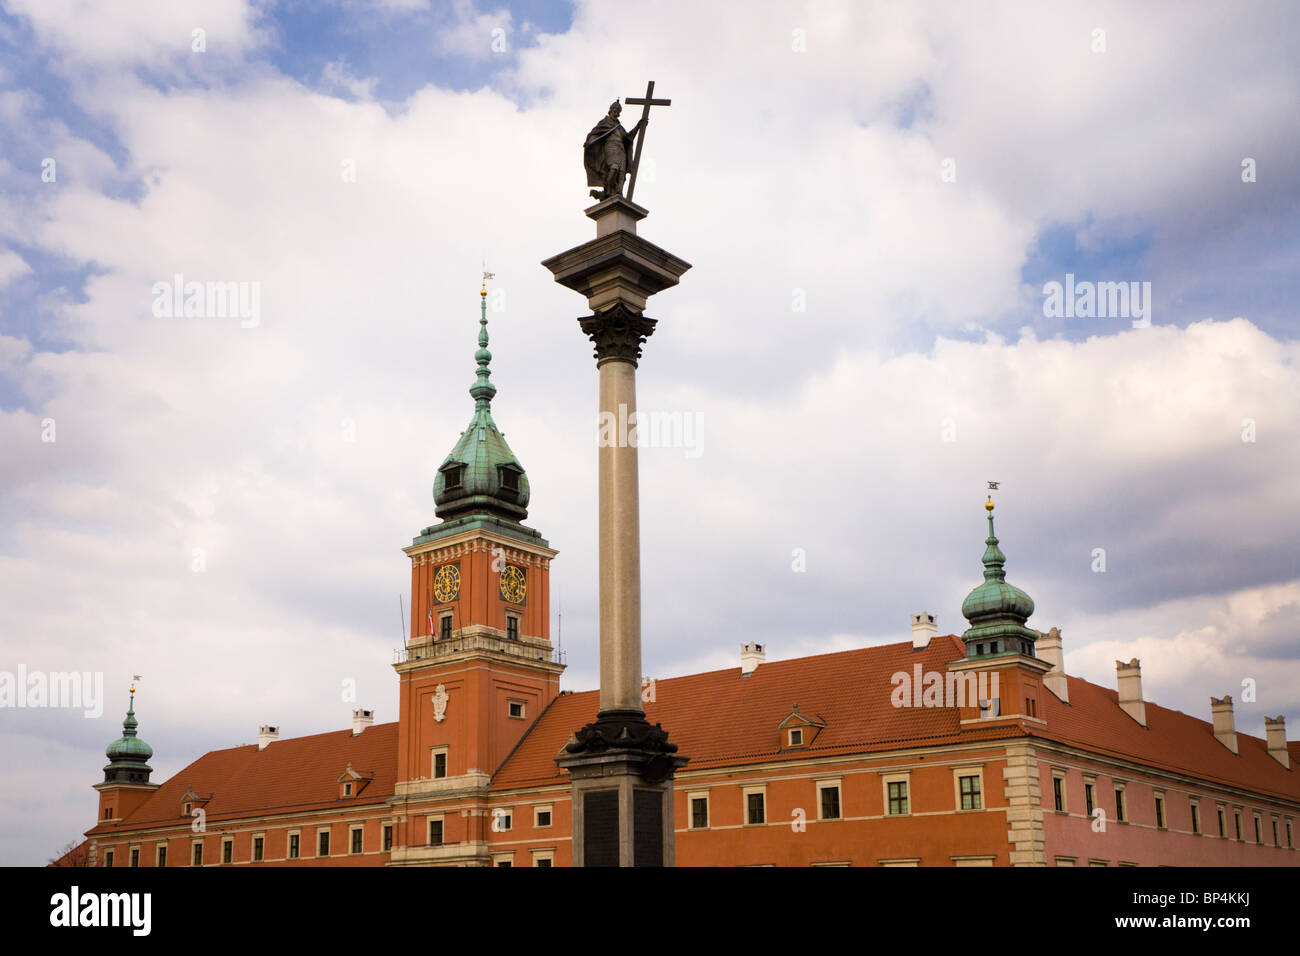 The Royal Castle and Zygmunt's Column, Warsaw Poland. It is located in the Castle Square, at the entrance to the Old Town. Stock Photo